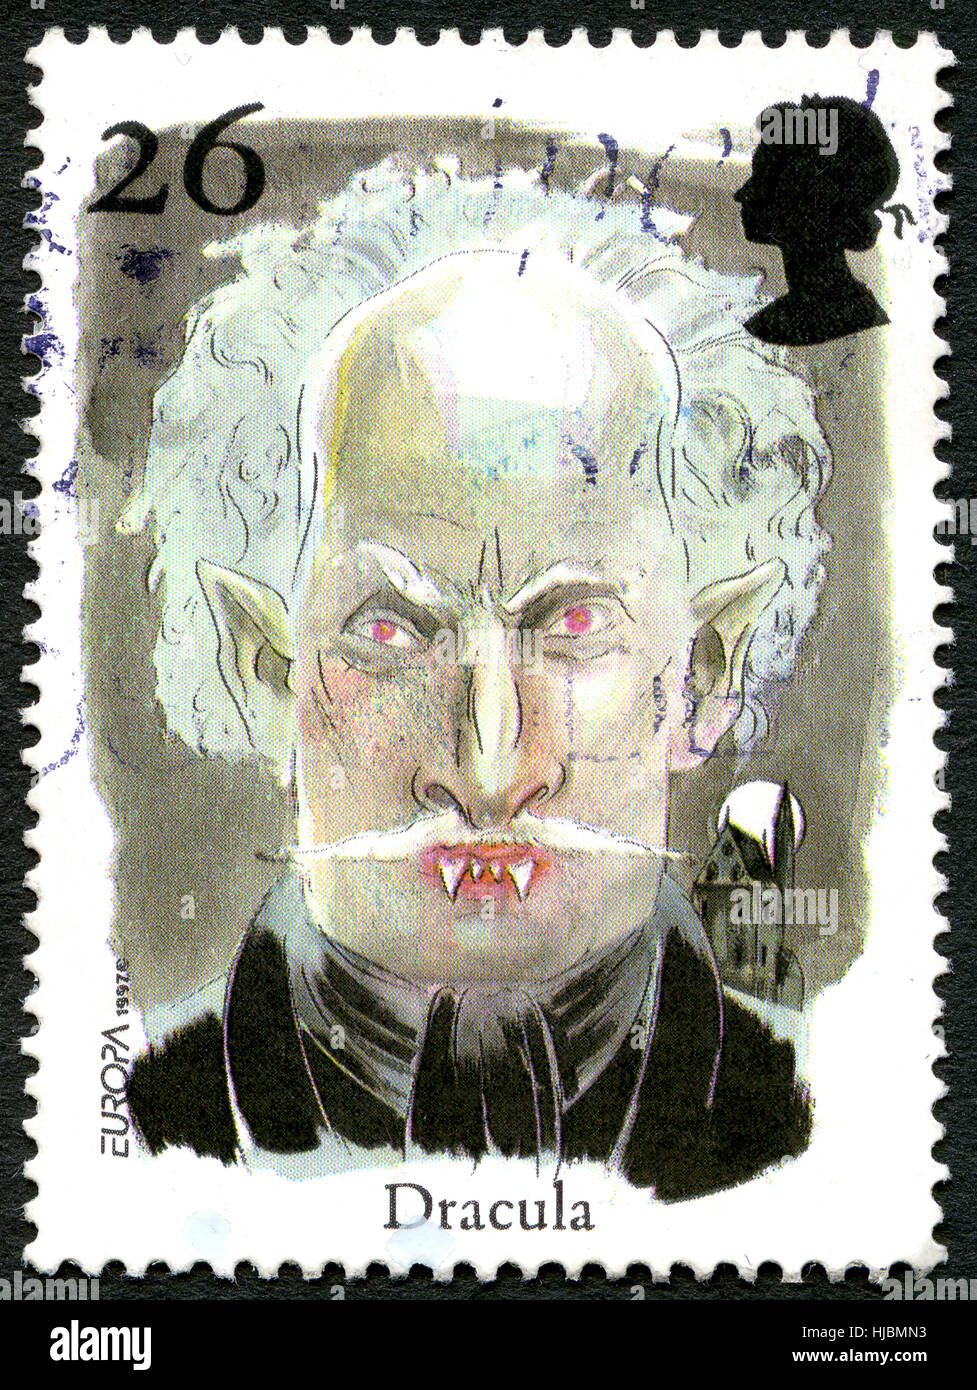 GREAT BRITAIN - CIRCA 1997: A used postage stamp from the UK, depicting an illustration of Vampire Count Dracula, circa 1997. Stock Photo